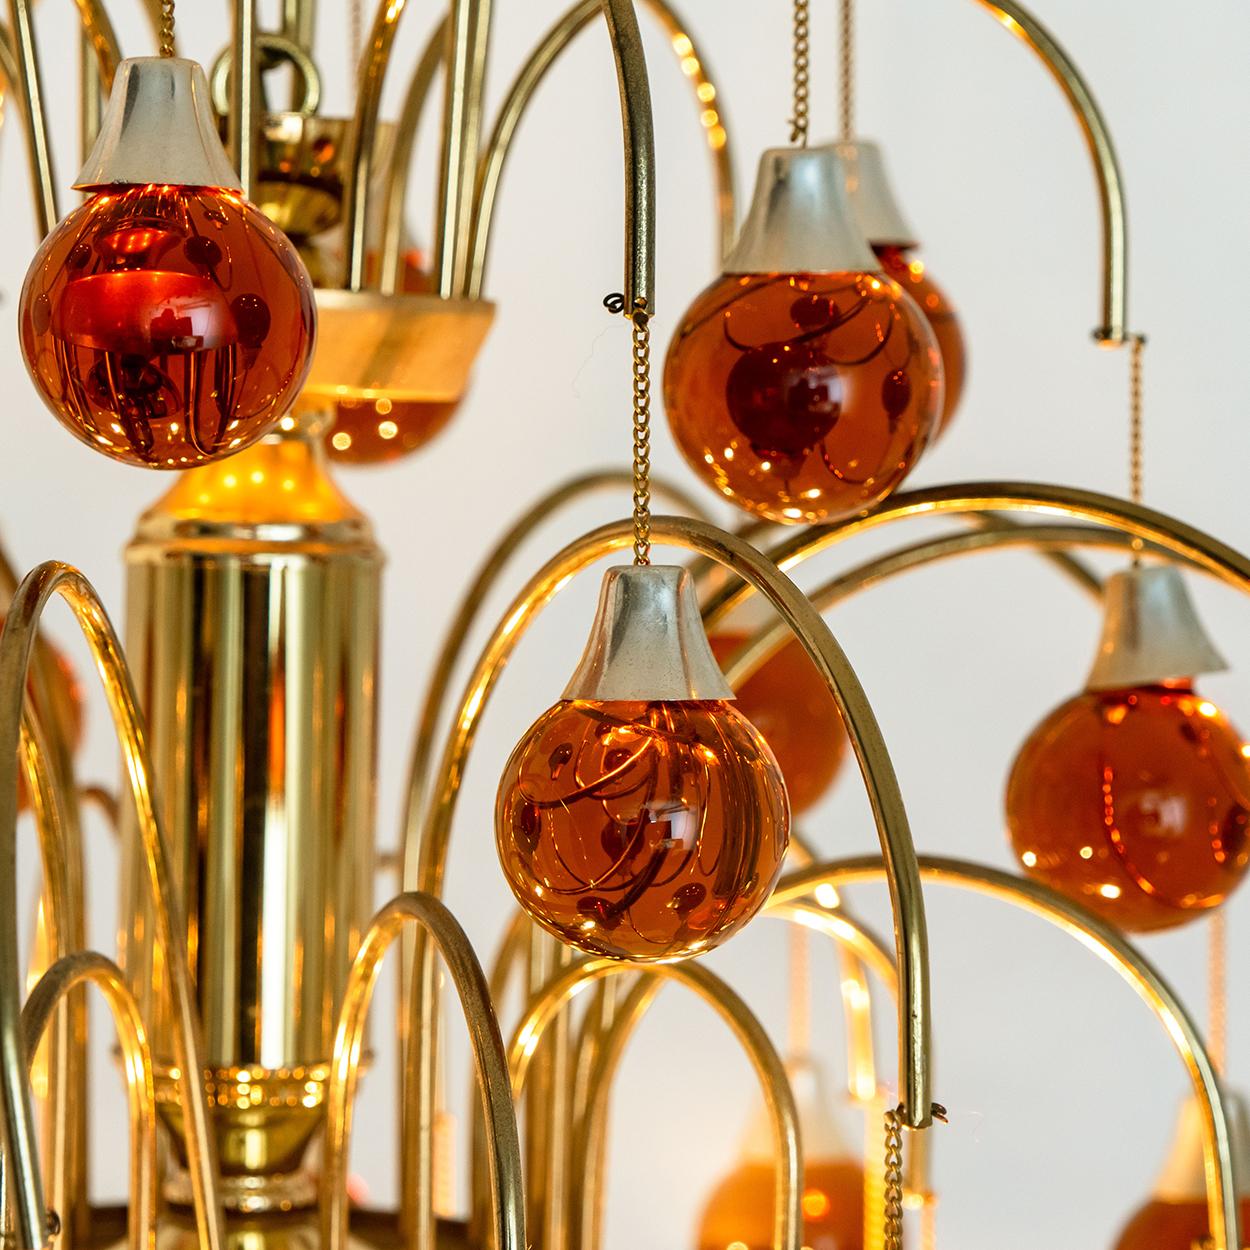 Pair of lovely Murano chandeliers whit dark 36 orange glass balls on a chain. With brass frame. Illuminates lovely
An exceptional set that you don't see often! A rare opportunity.

In very good vintage condition. Drop chain can be adjusted as